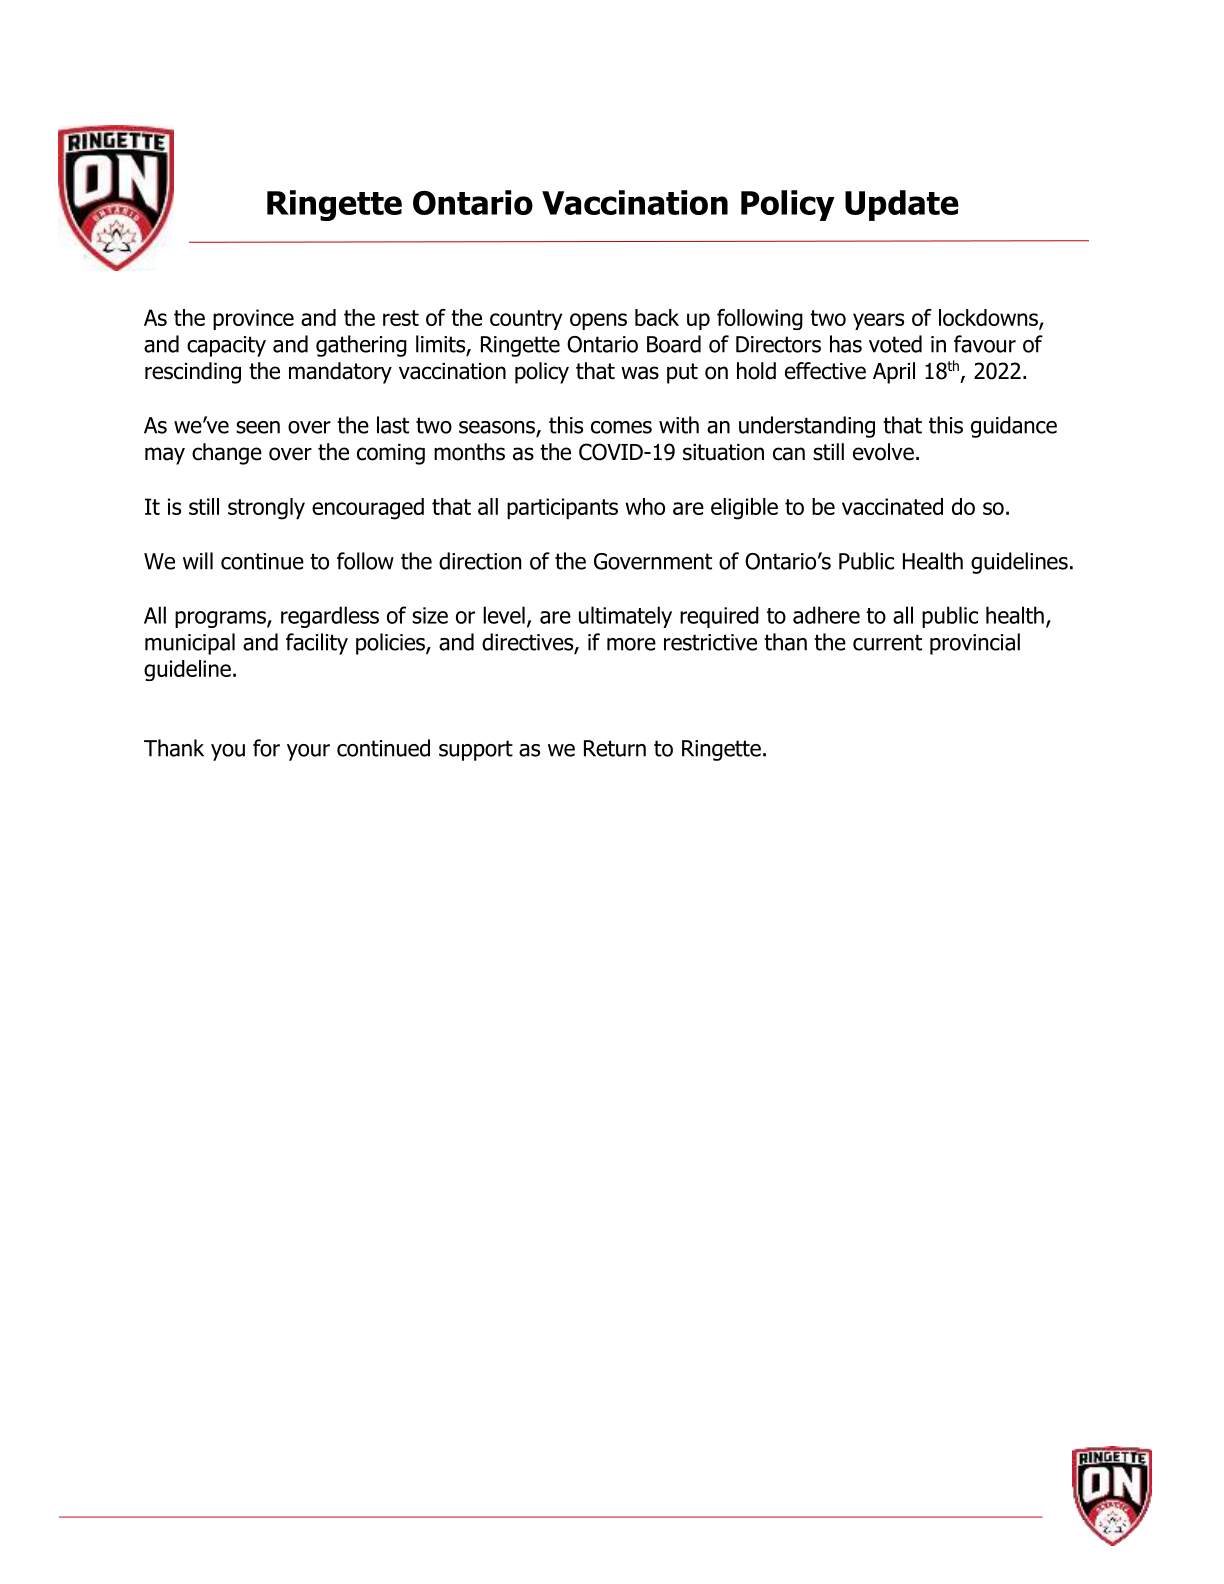 RO Vacccination Policy Update